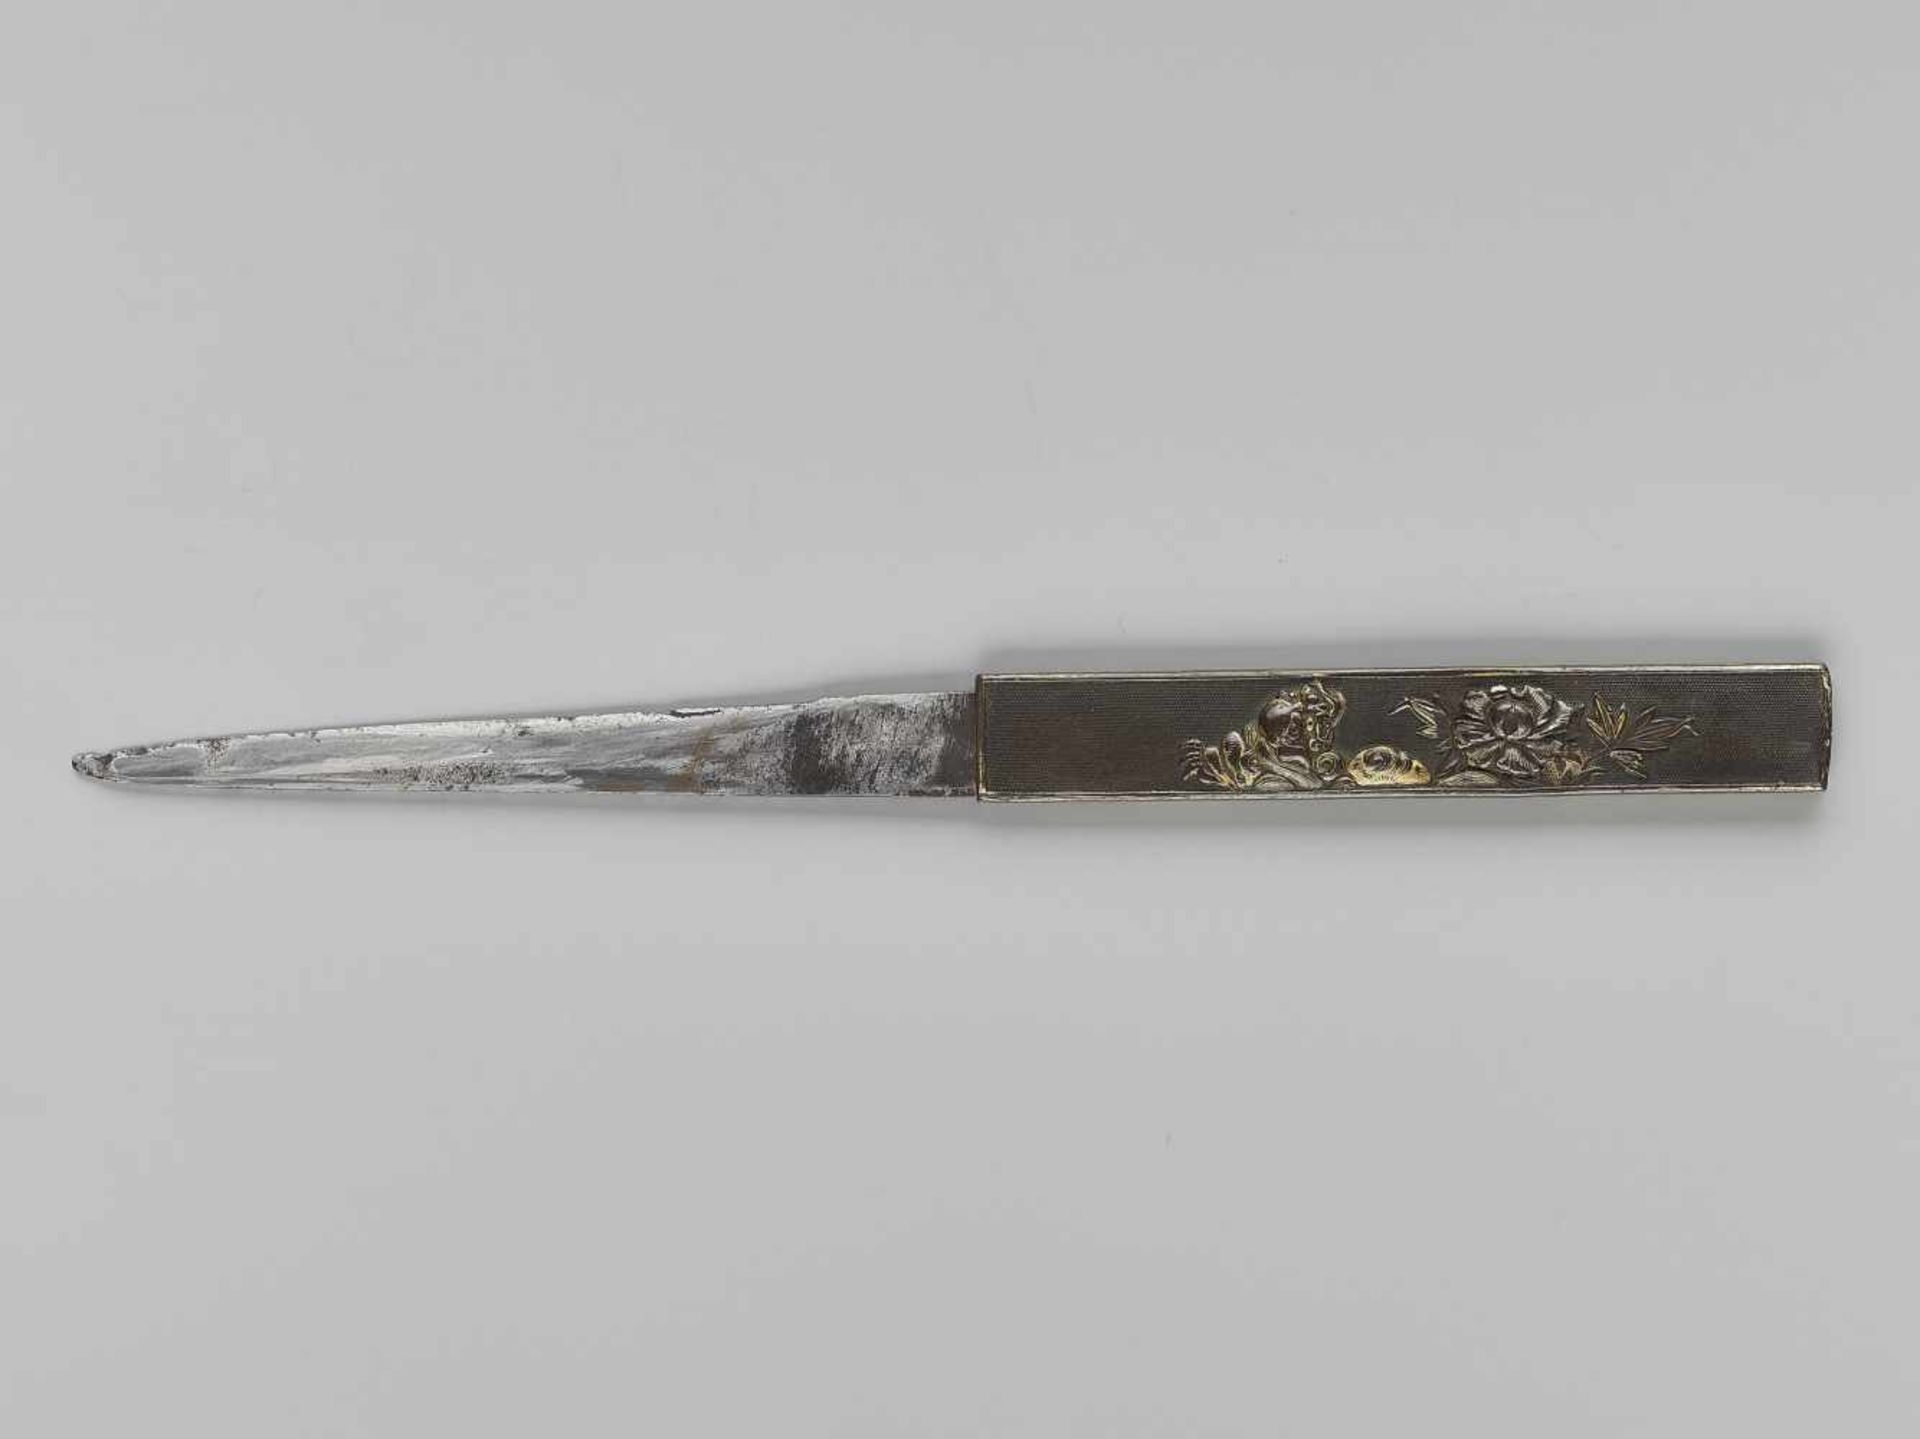 TOMOTSUGU: A TANTO IN KOSHIRAE By Tomotsugu, signed TomotsuguJapan, c. 16th to 17th centuryThe - Image 10 of 13